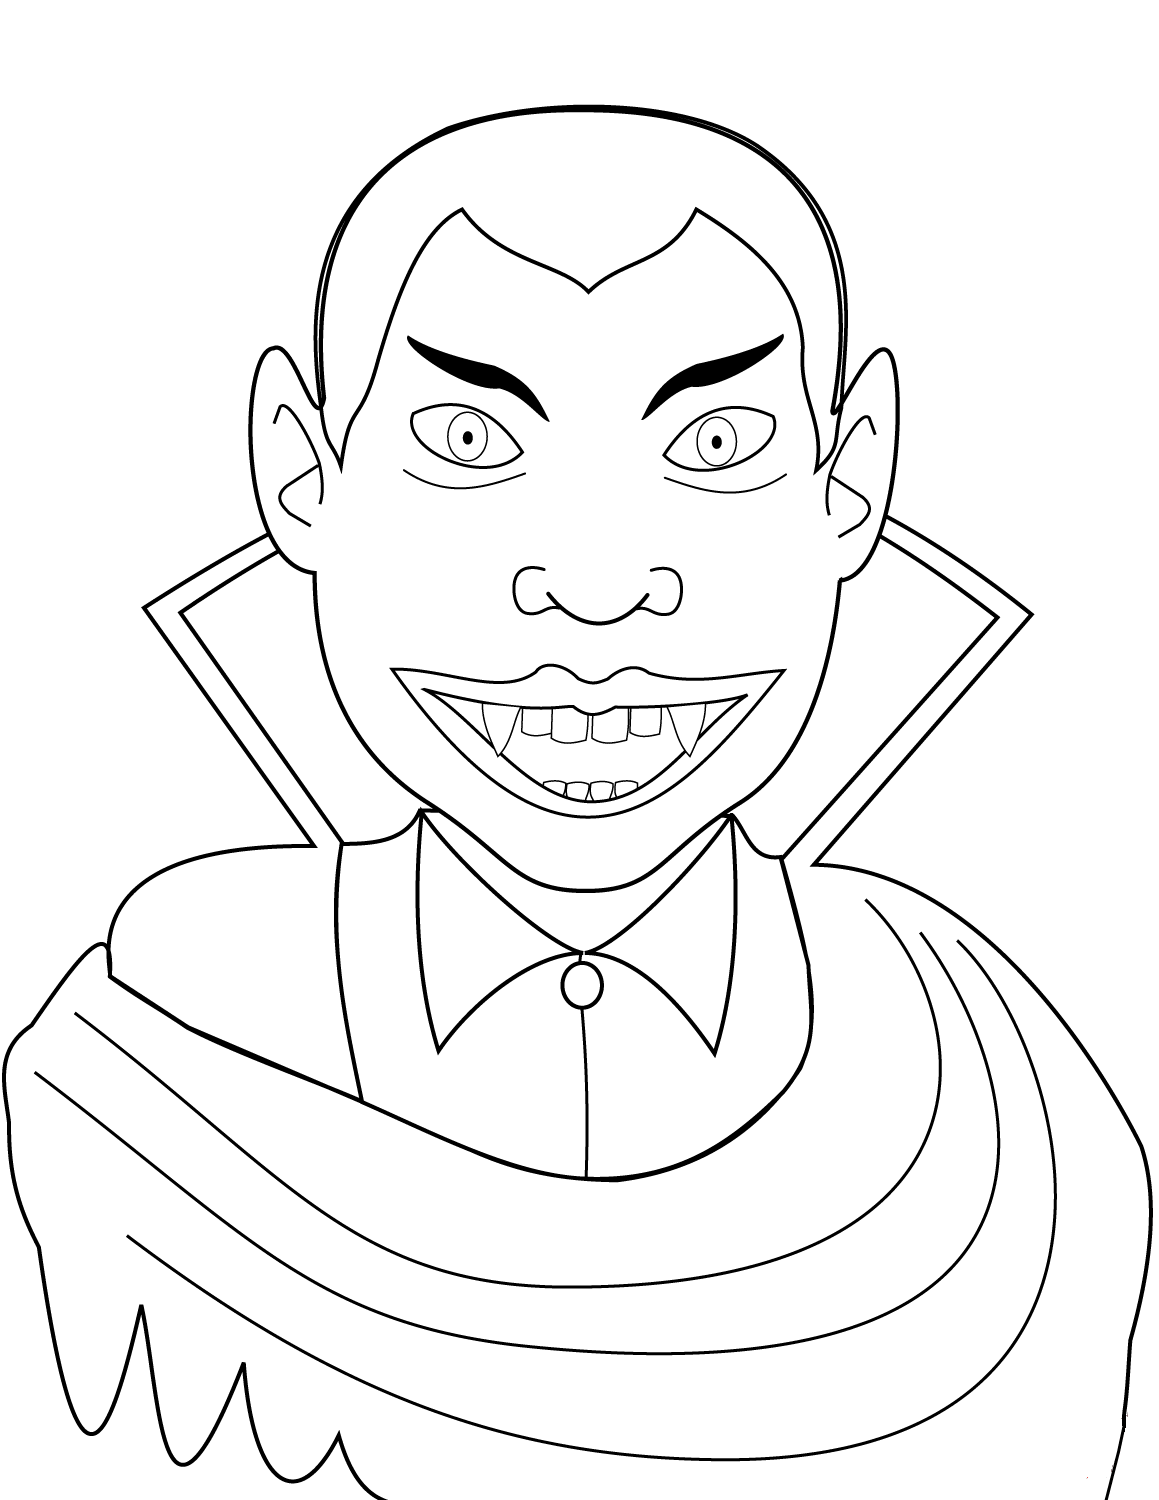 Count Dracula coloring page